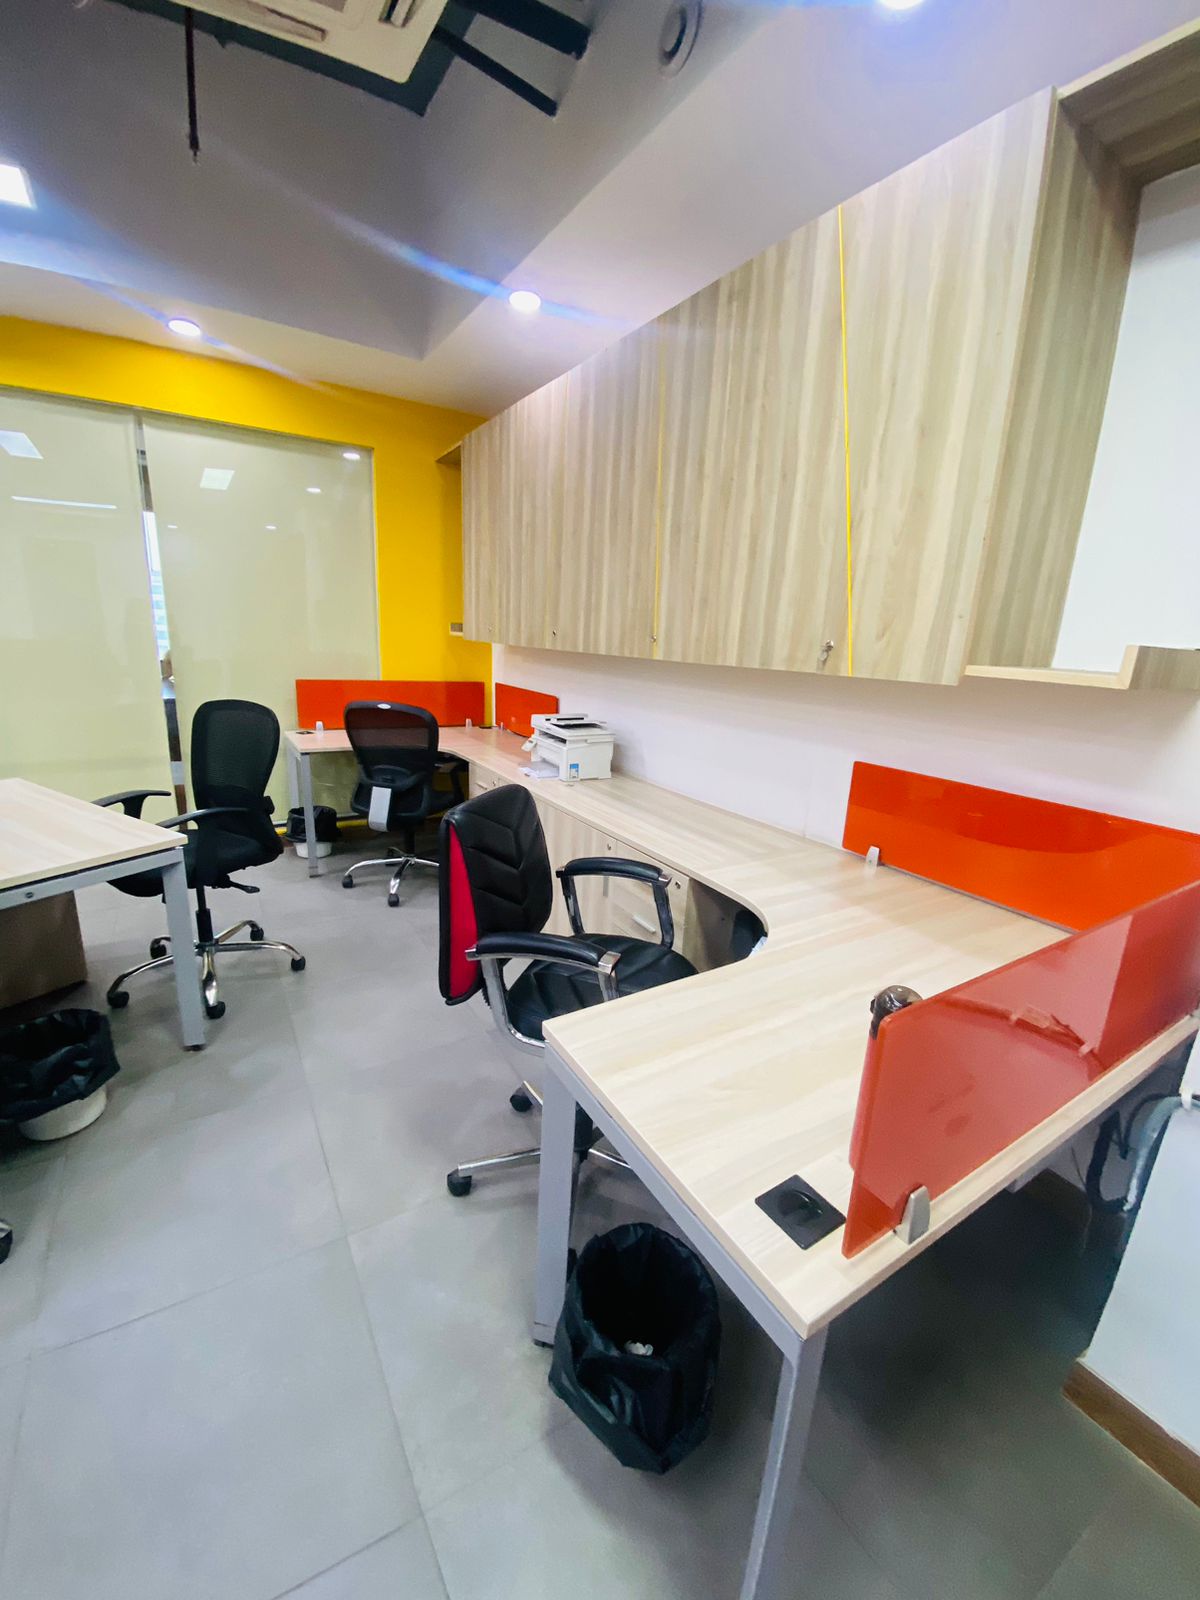 2100 Sq Feet Office Space for Rent Only in Sector 106